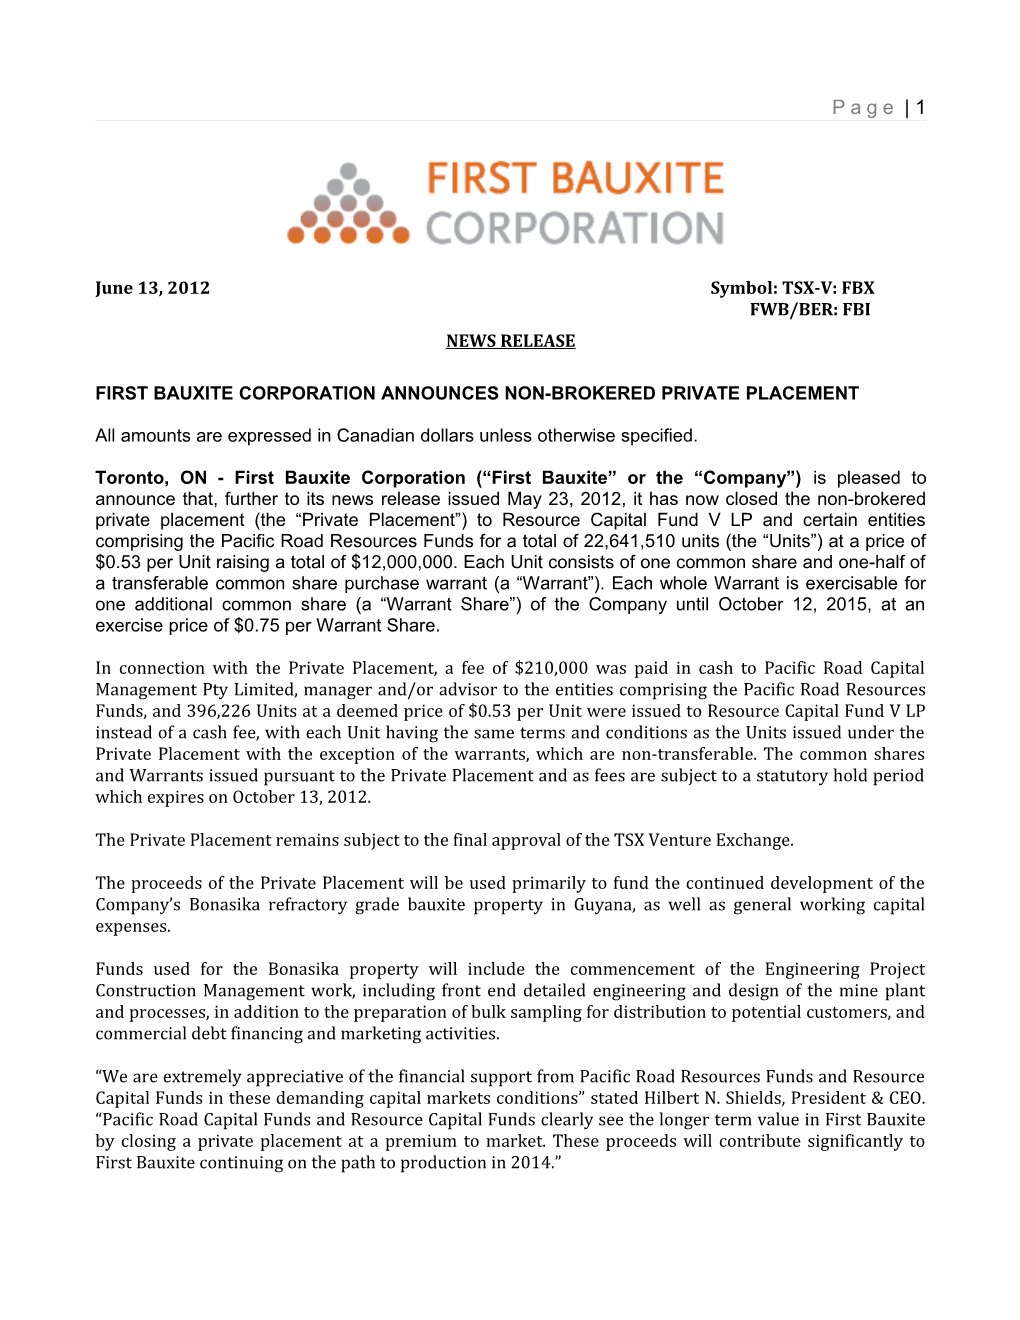 First Bauxite Corporation Announces Non-Brokered Private Placement